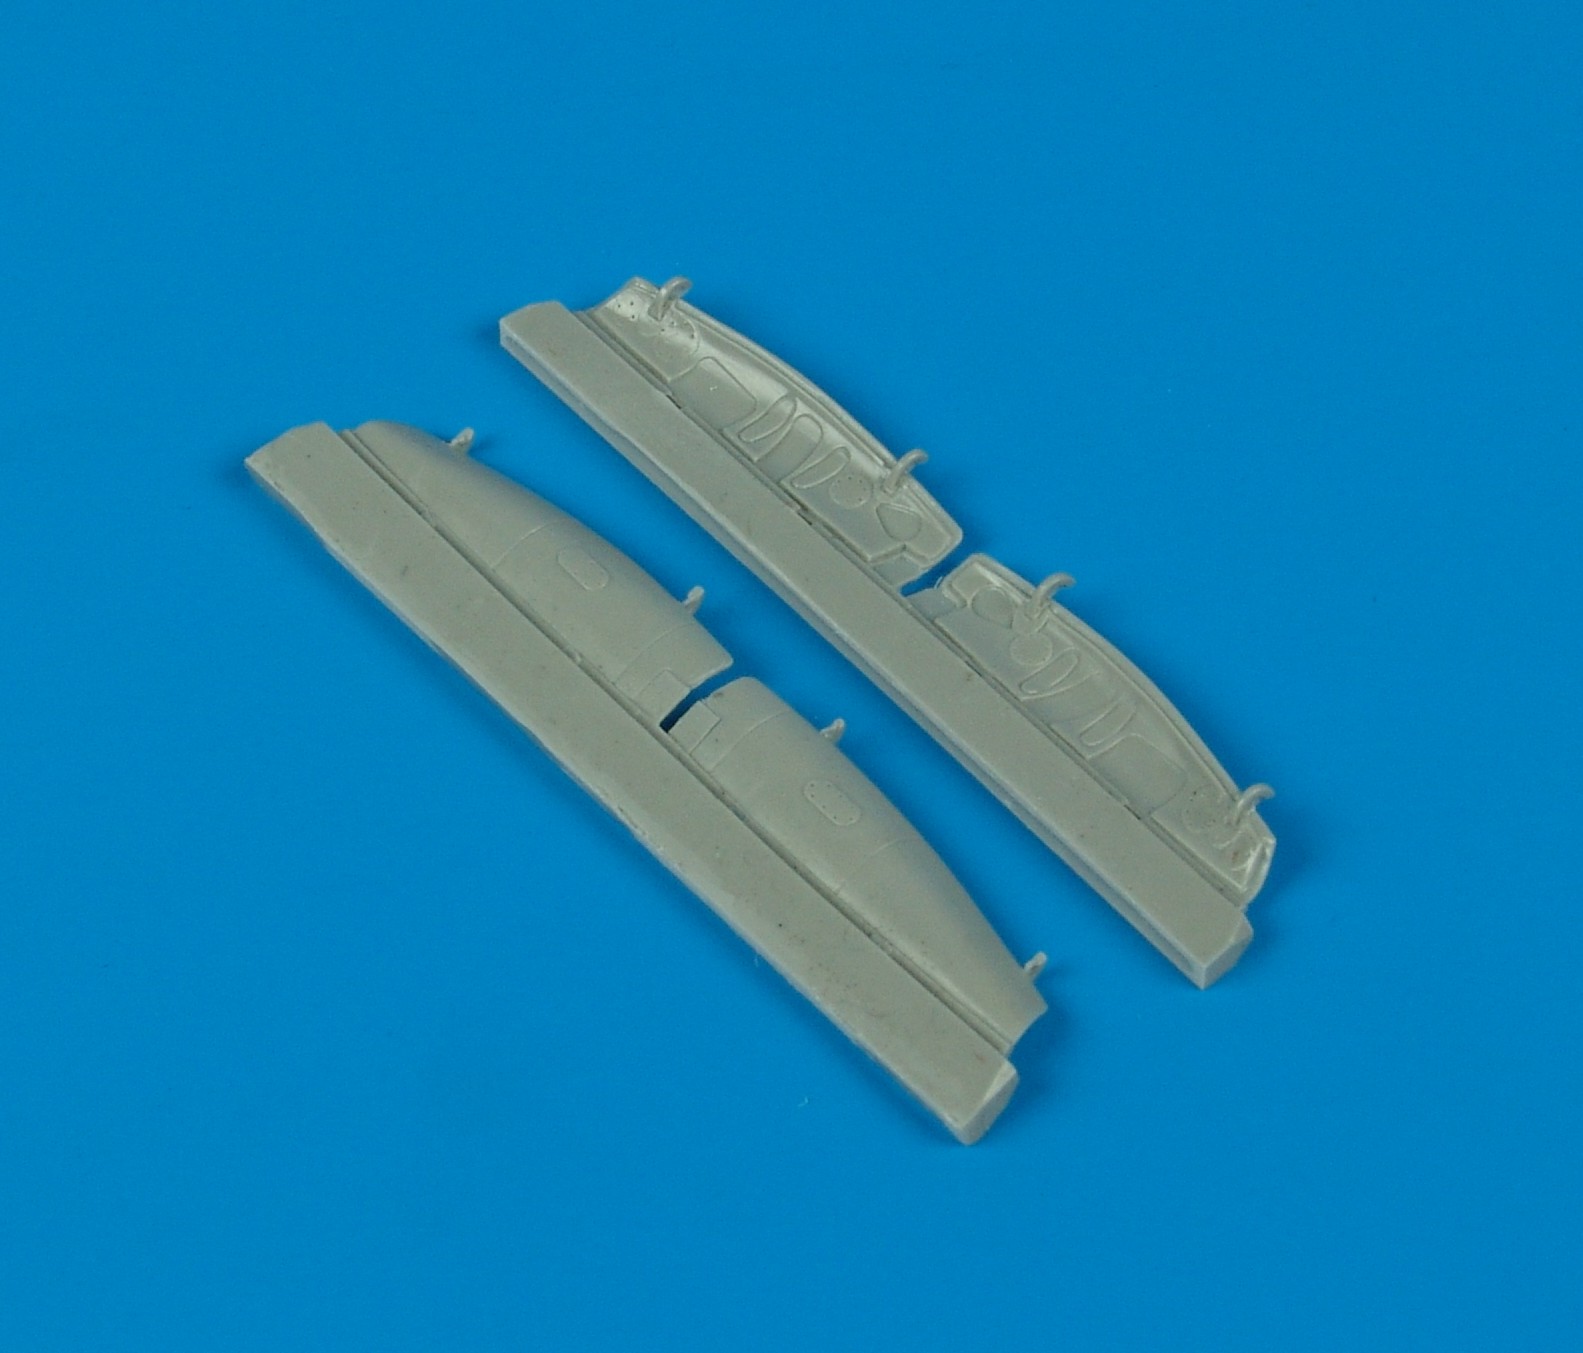 1/72 Mosquito underccarriage covers